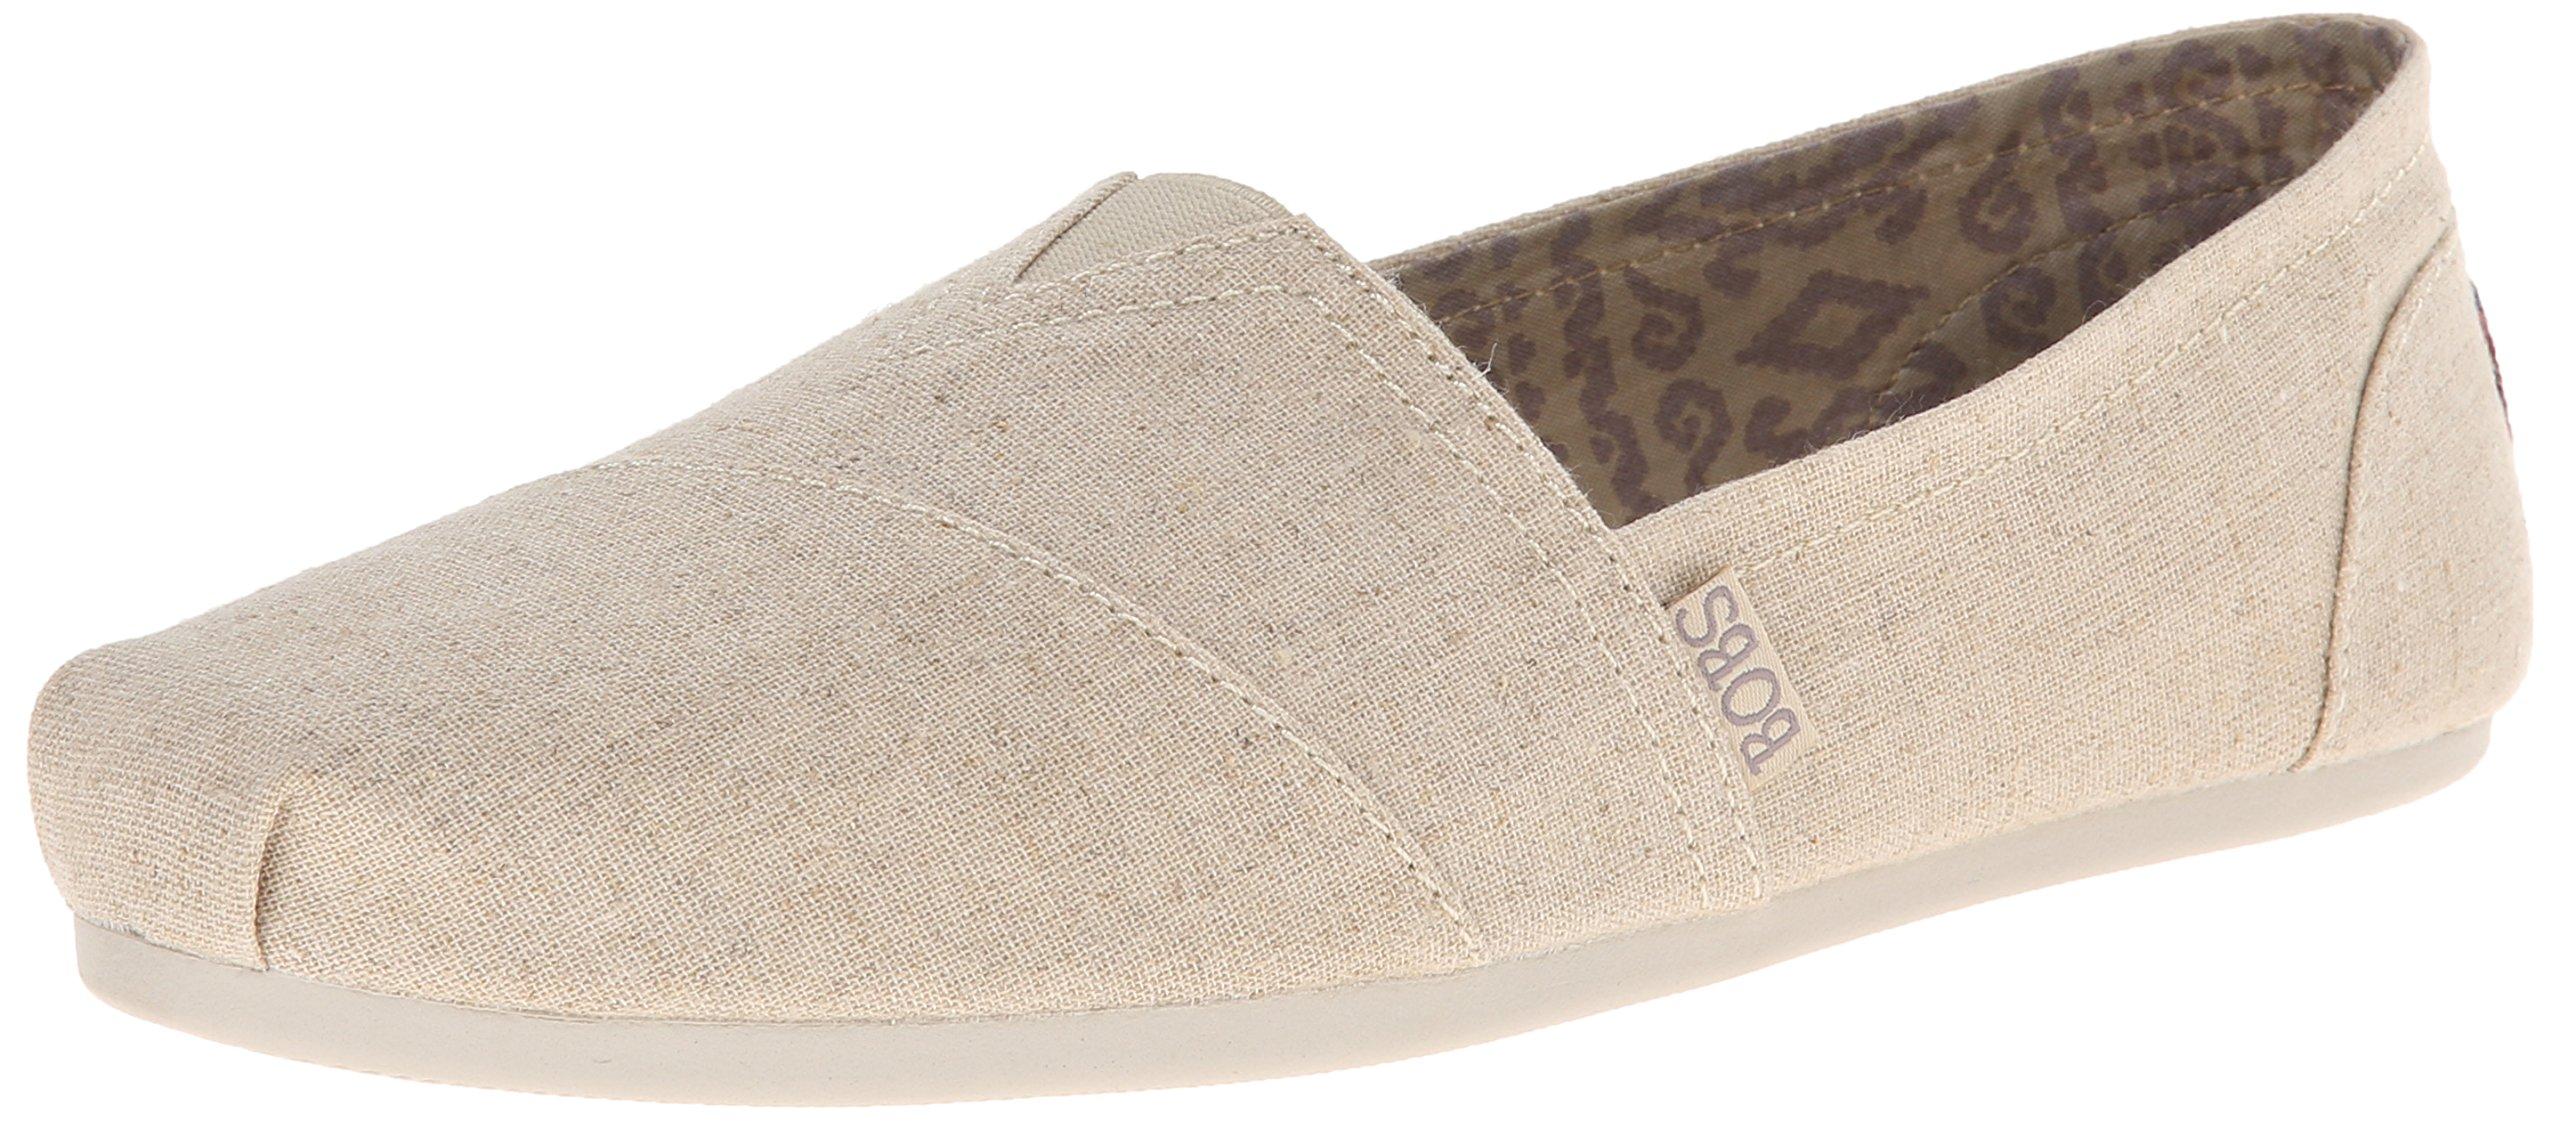 Skechers Bobs From Bobs Plush-best Wishes Natural 7 - Save 27% - Lyst